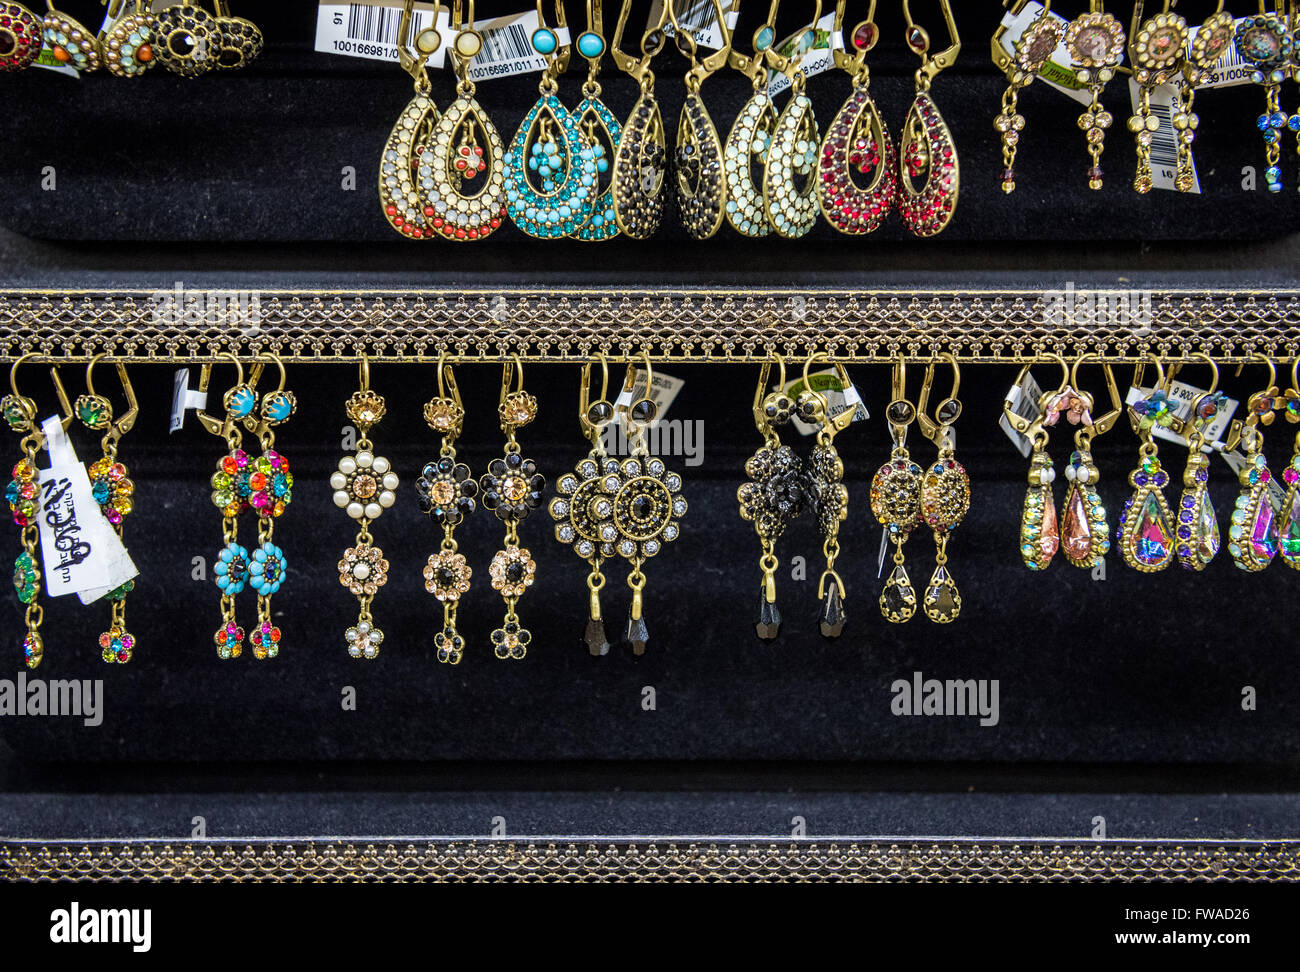 earrings in Visitors Center shop called The World of Michal Negrin in Stock  Photo - Alamy